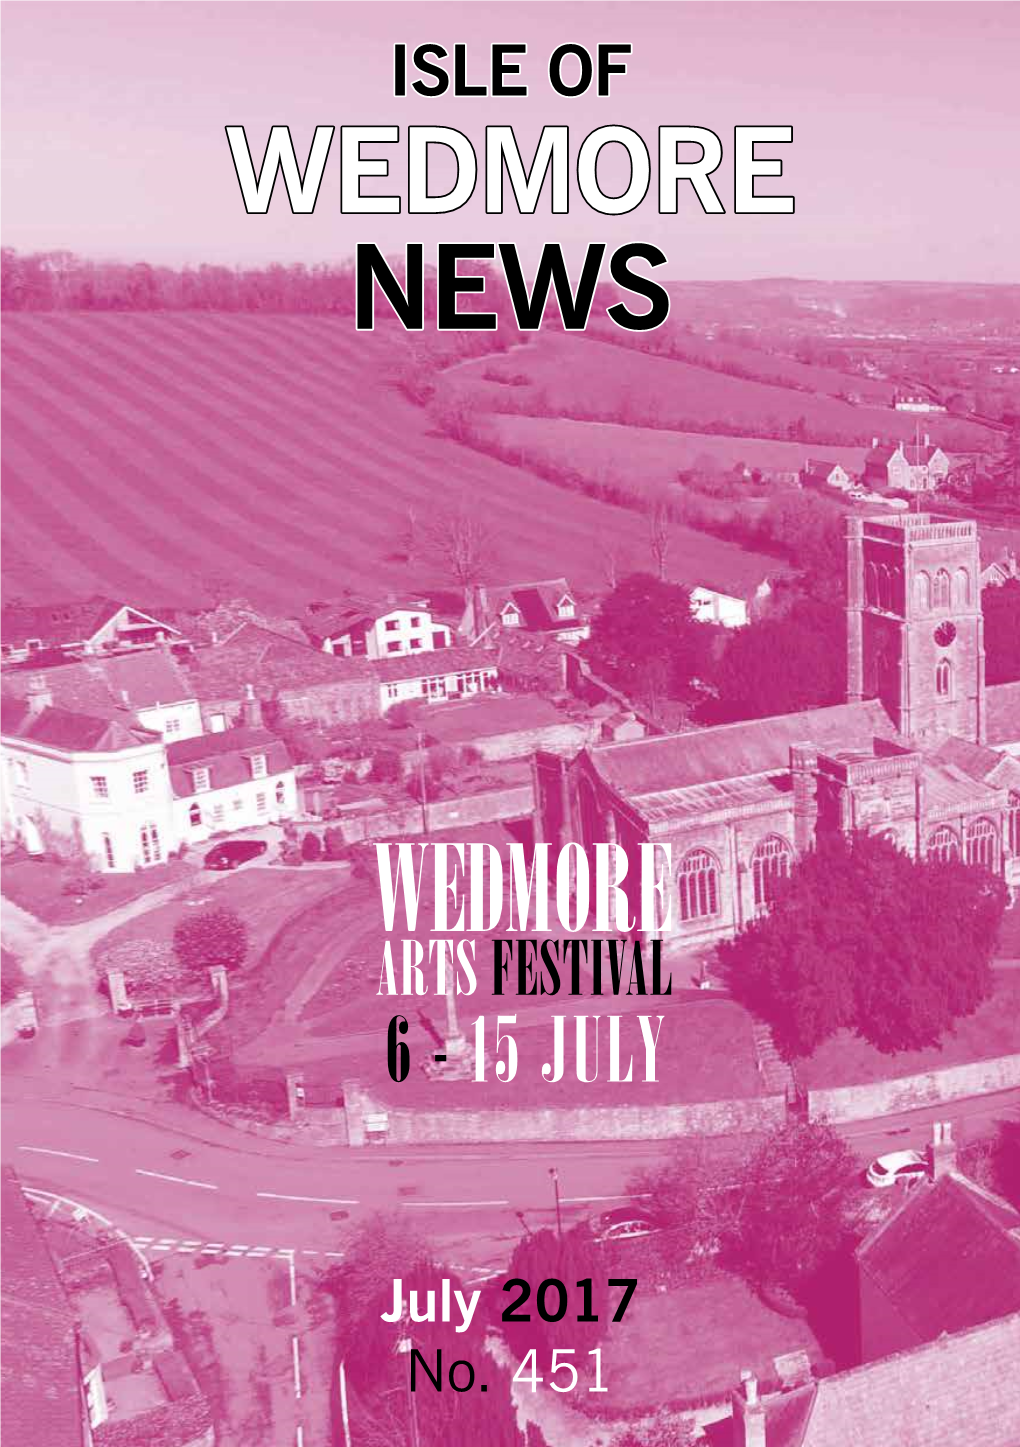 The Isle of Wedmore News Welcomes All Contributions and Letters